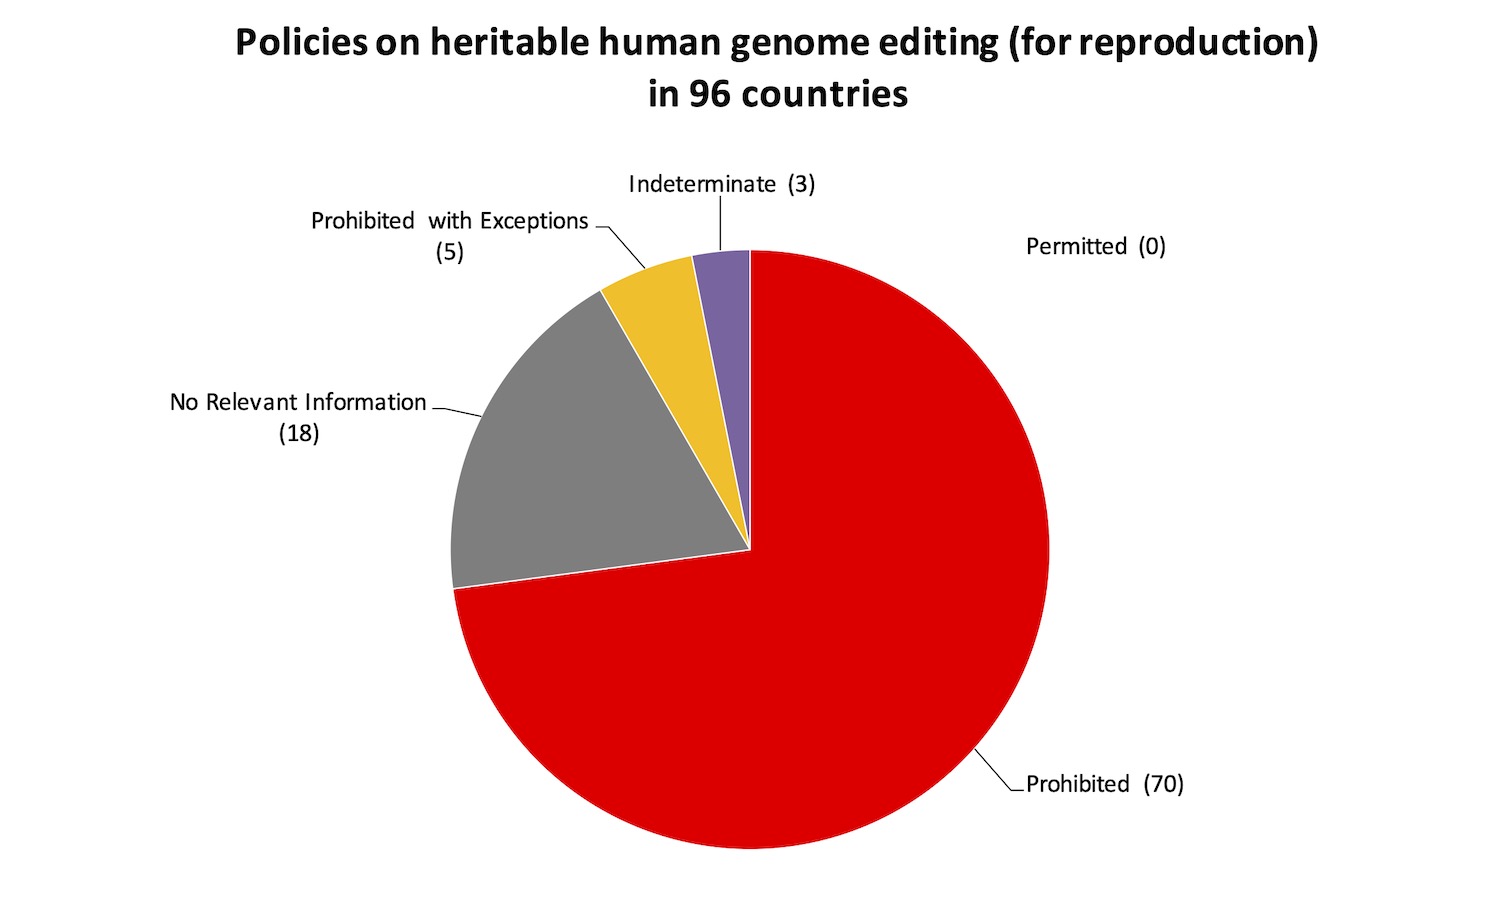 pie chart almost 3/4 red shows proportion of countries that prohibit heritable human genome editing